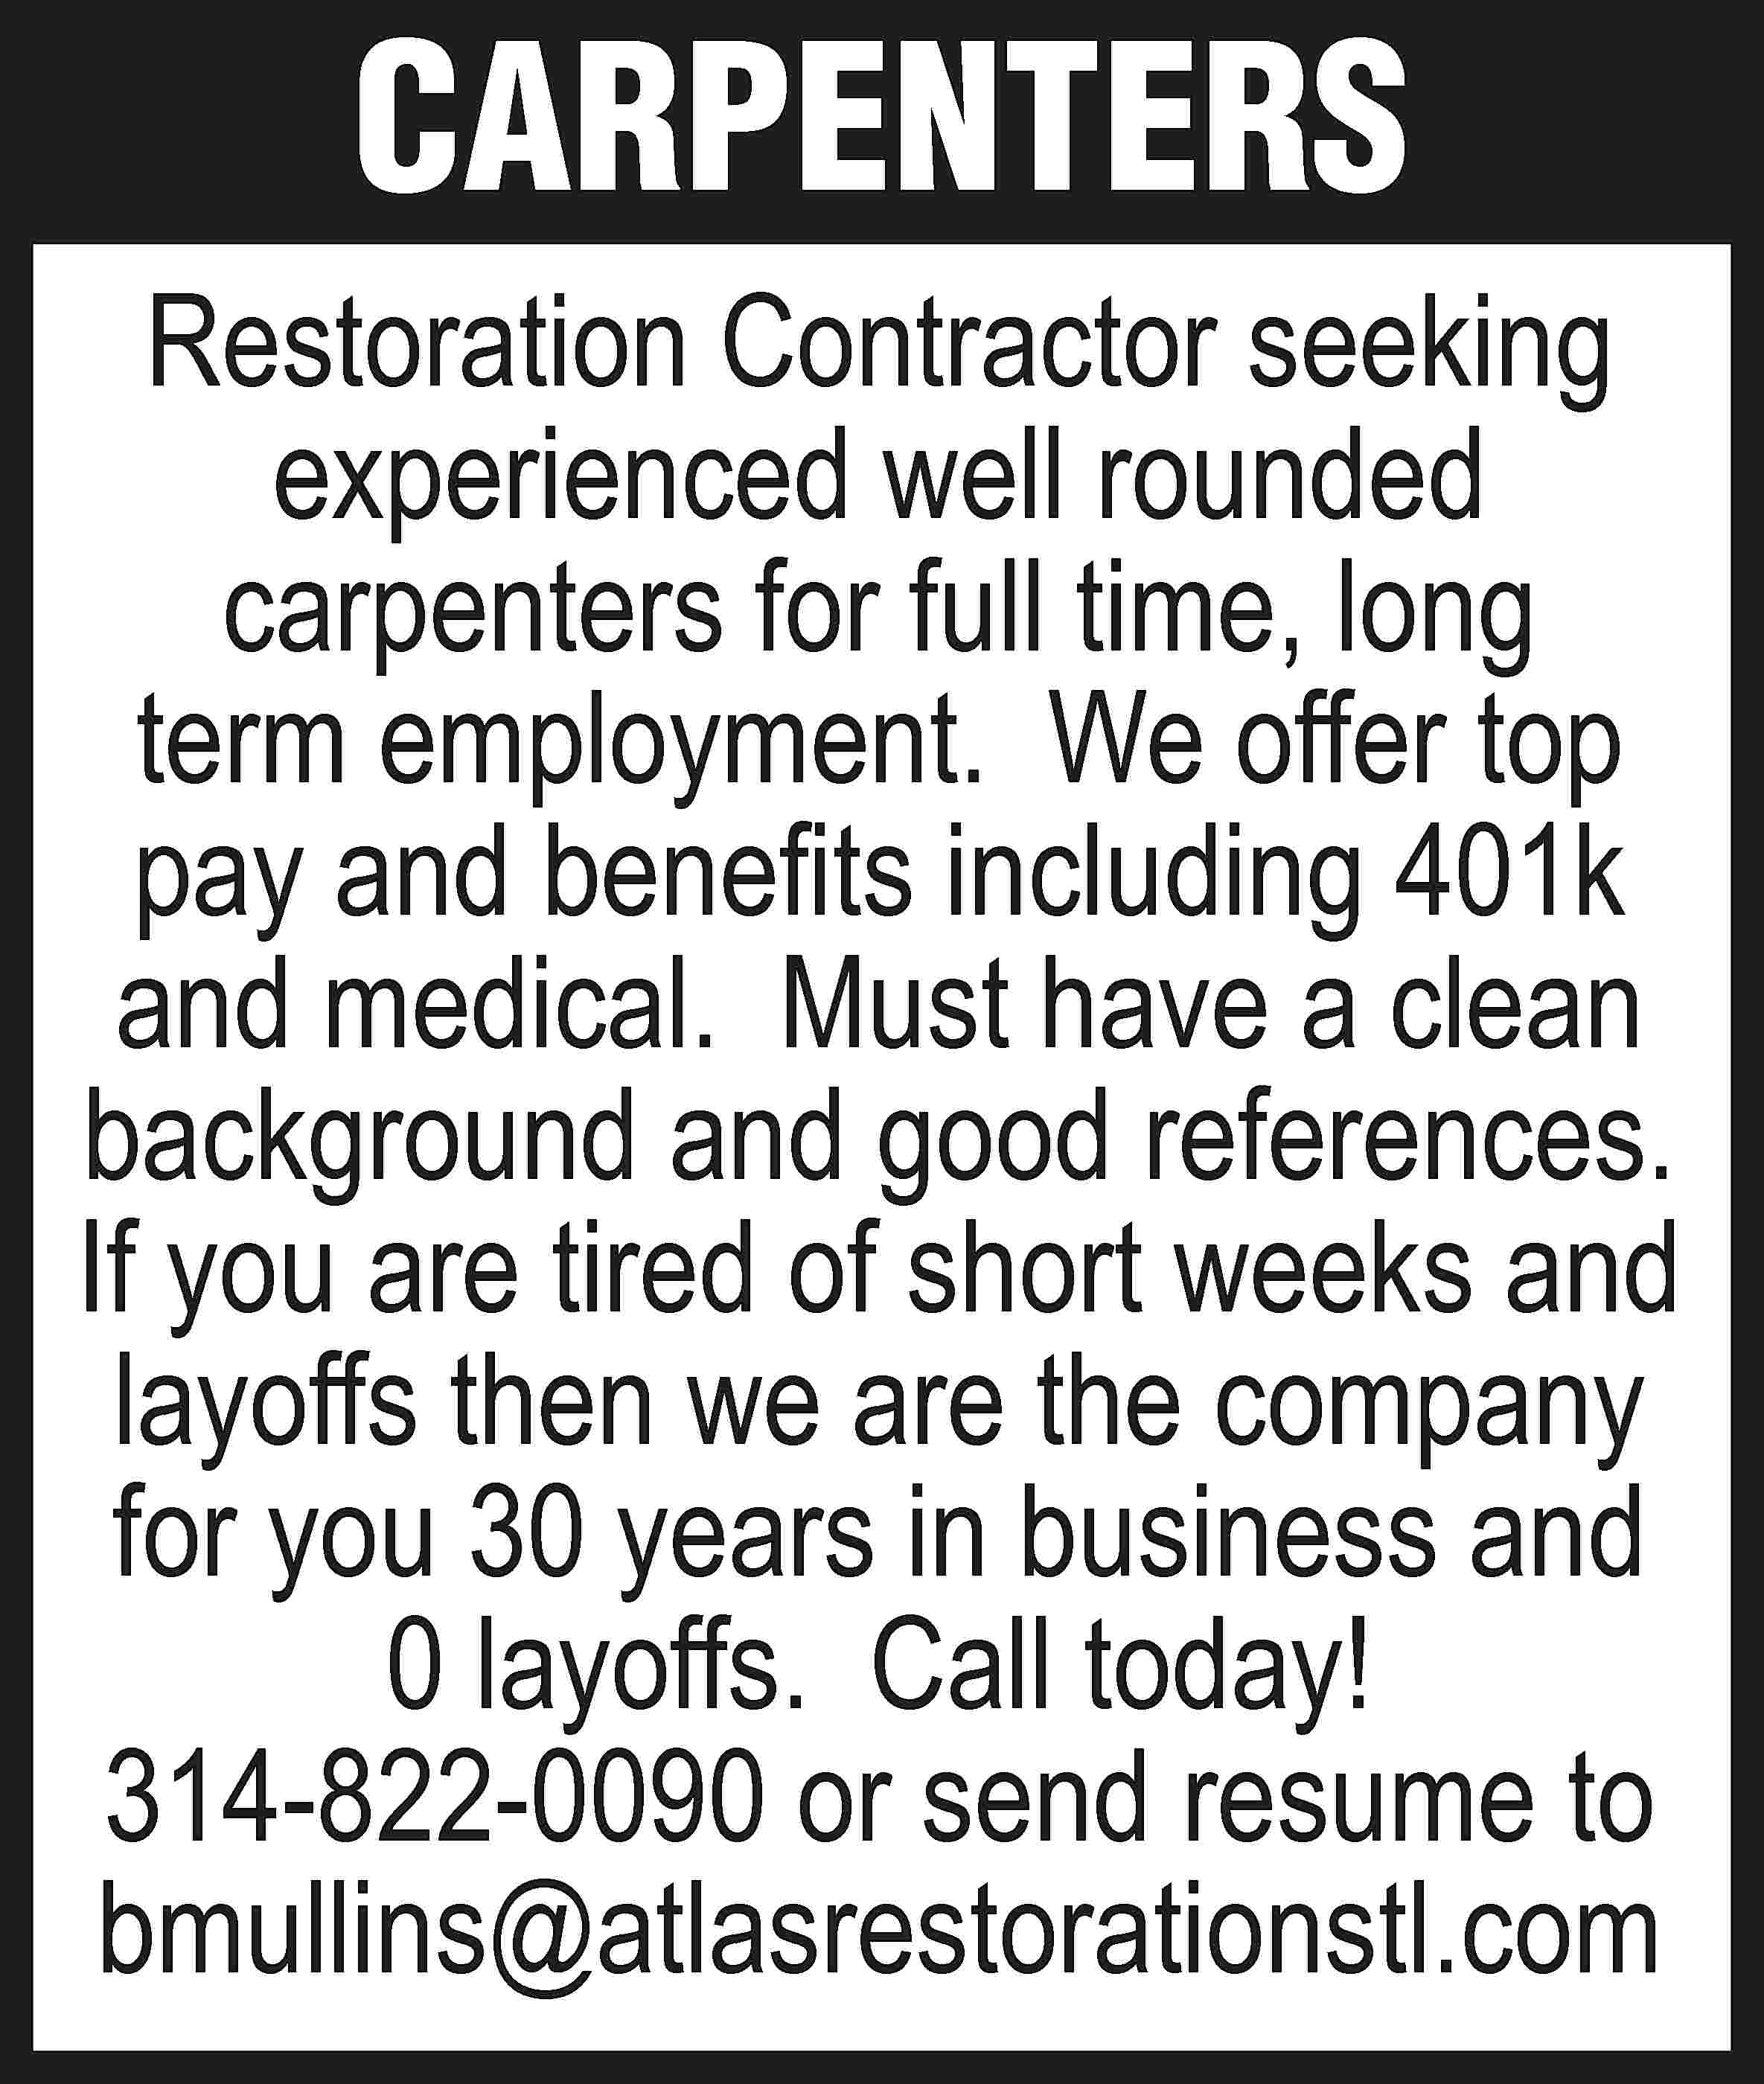 CARPENTERS Restoration Contractor seeking experienced  CARPENTERS Restoration Contractor seeking experienced well rounded carpenters for full time, long term employment. We offer top pay and benefits including 401k and medical. Must have a clean background and good references. If you are tired of short weeks and layoffs then we are the company for you 30 years in business and 0 layoffs. Call today! 314-822-0090 or send resume to bmullins@atlasrestorationstl.com